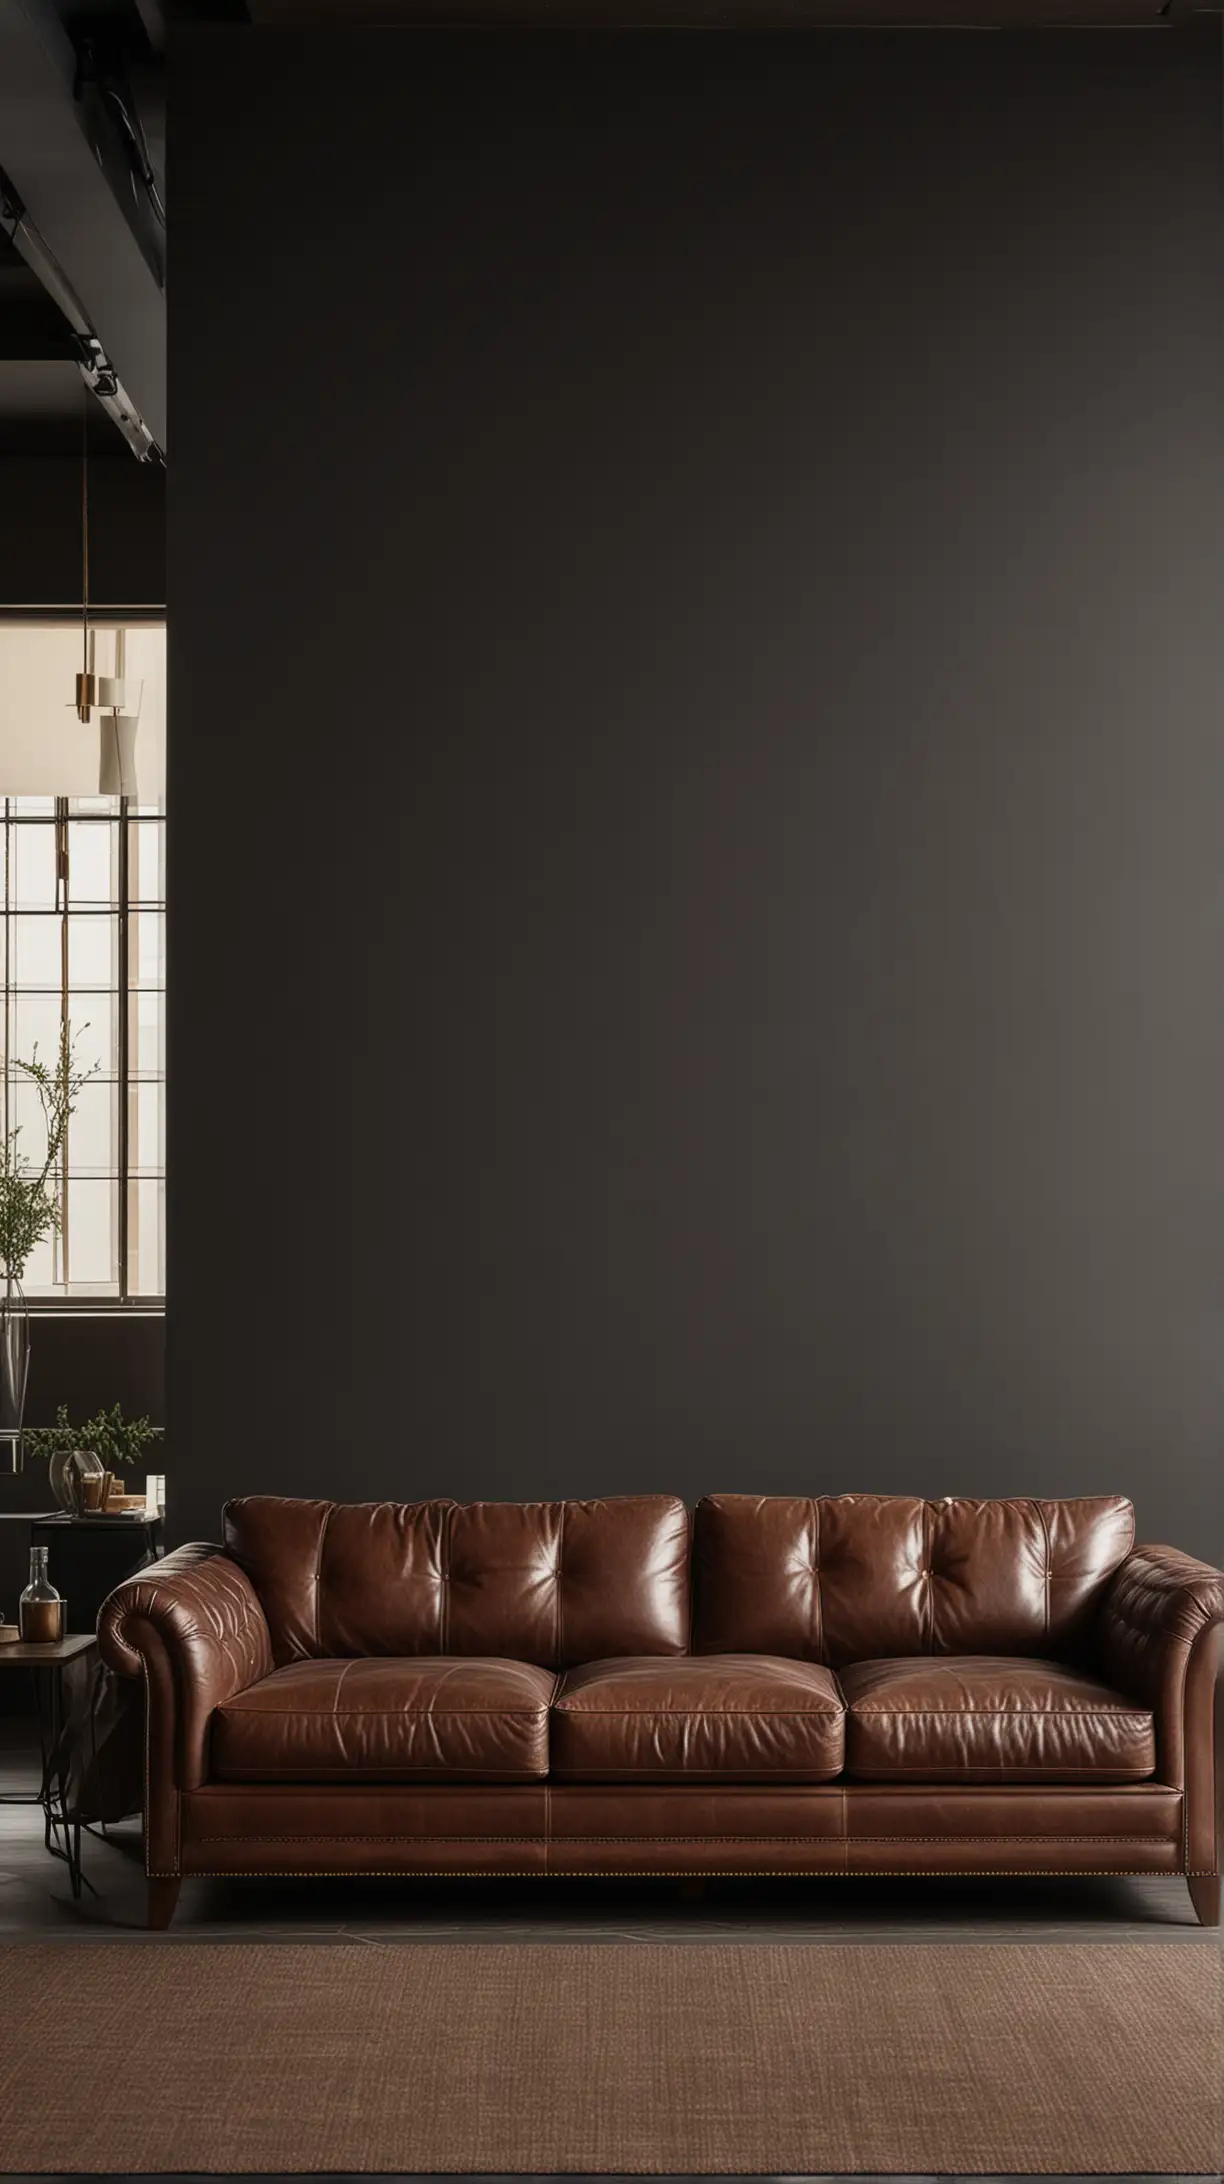 Luxurious dark brown leather sofa in a masculine living room setting, featuring dark walls and minimal decor, emphasizing the sofa's rich texture and craftsmanship.